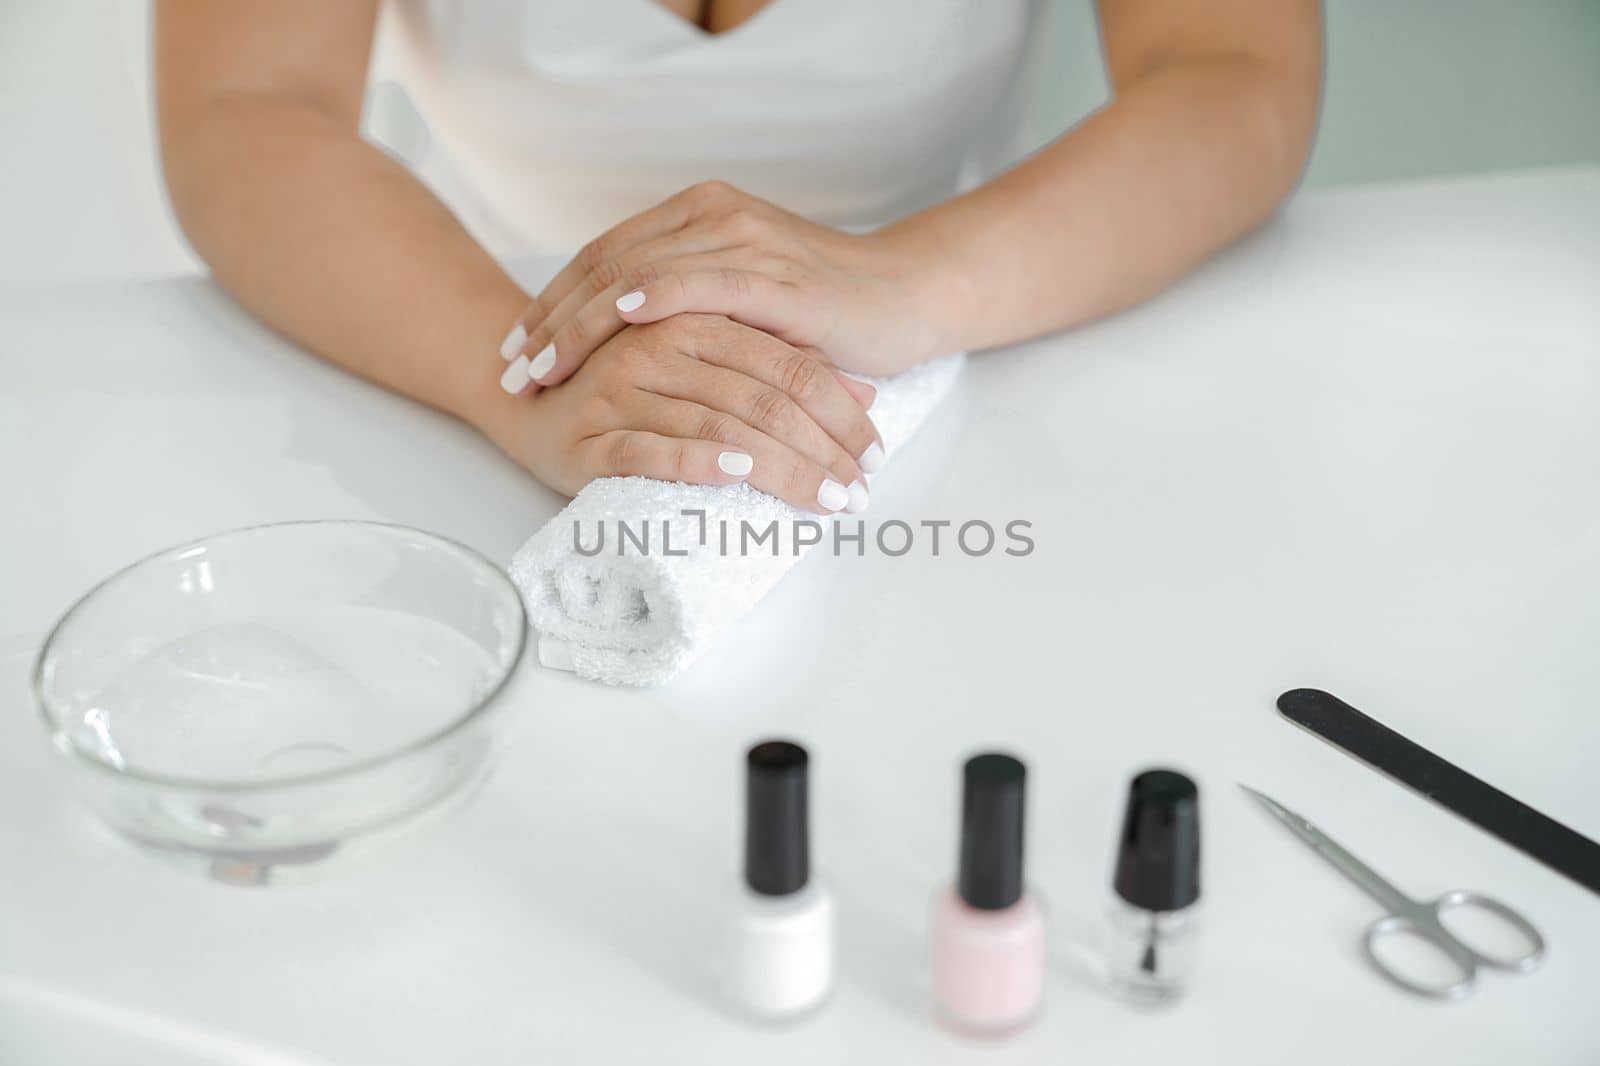 Women's hands with white manicure are lying on towel roller, waiting for varnish to dry, manicure accessories are lying on table next to it. Hands close-up by Laguna781